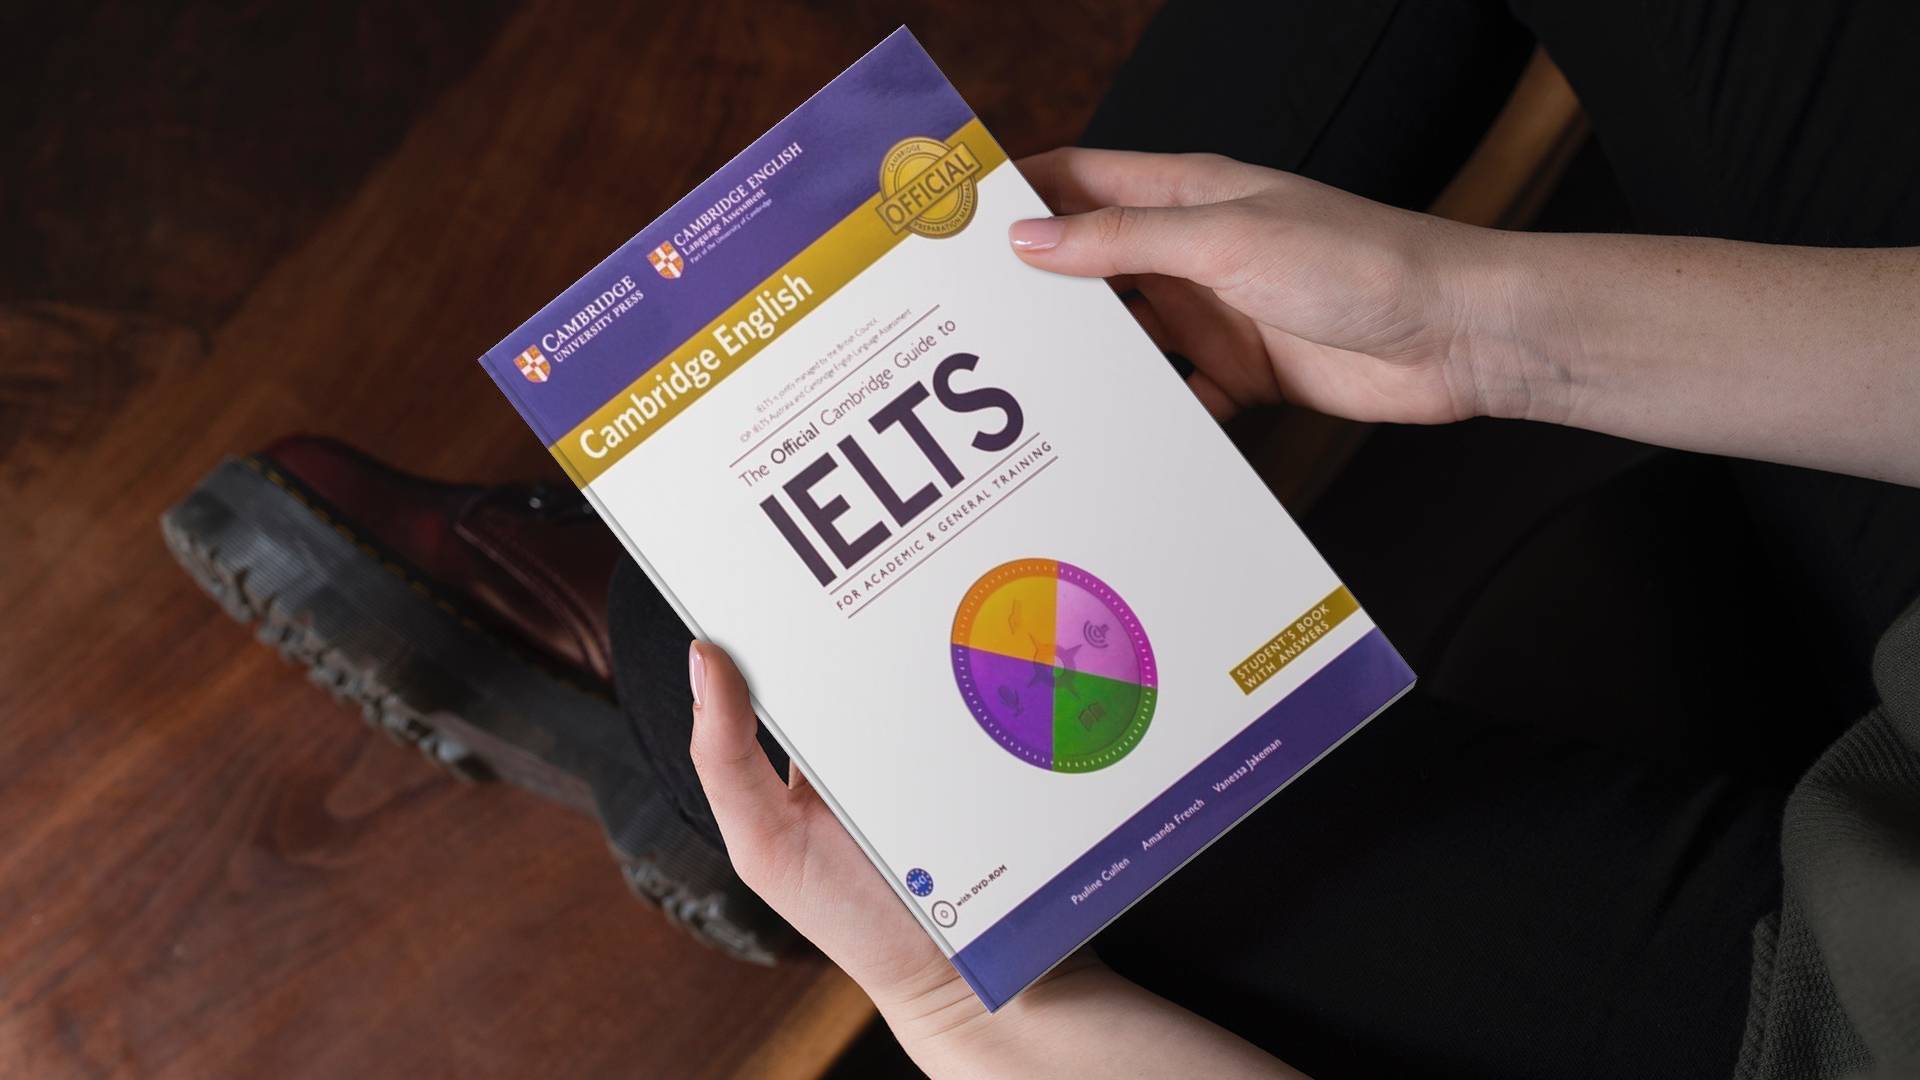 The Official Cambridge Guide To Ielts for Academic & General Training